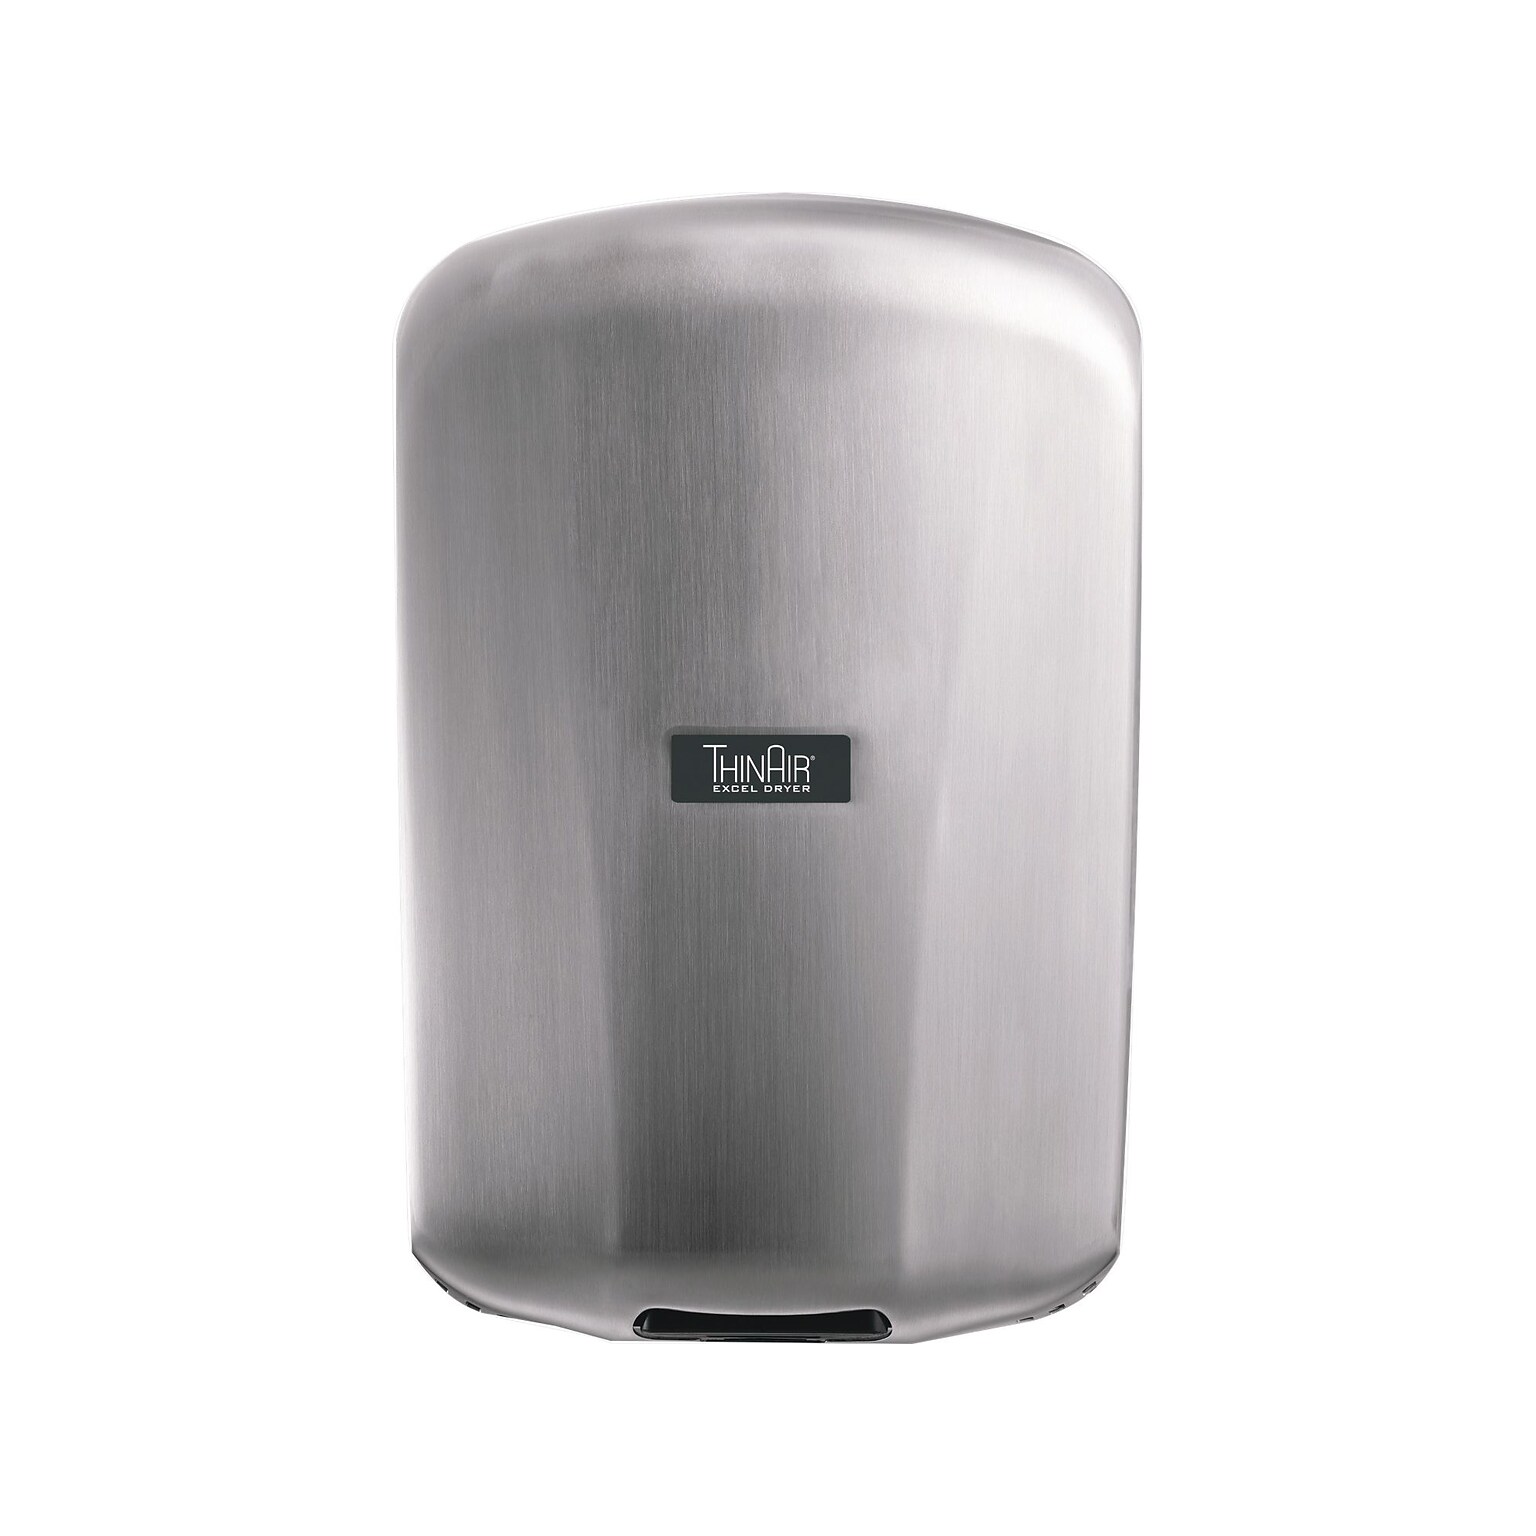 ThinAir 208-277V Automatic Hand Dryer, Stainless Steel (324116)